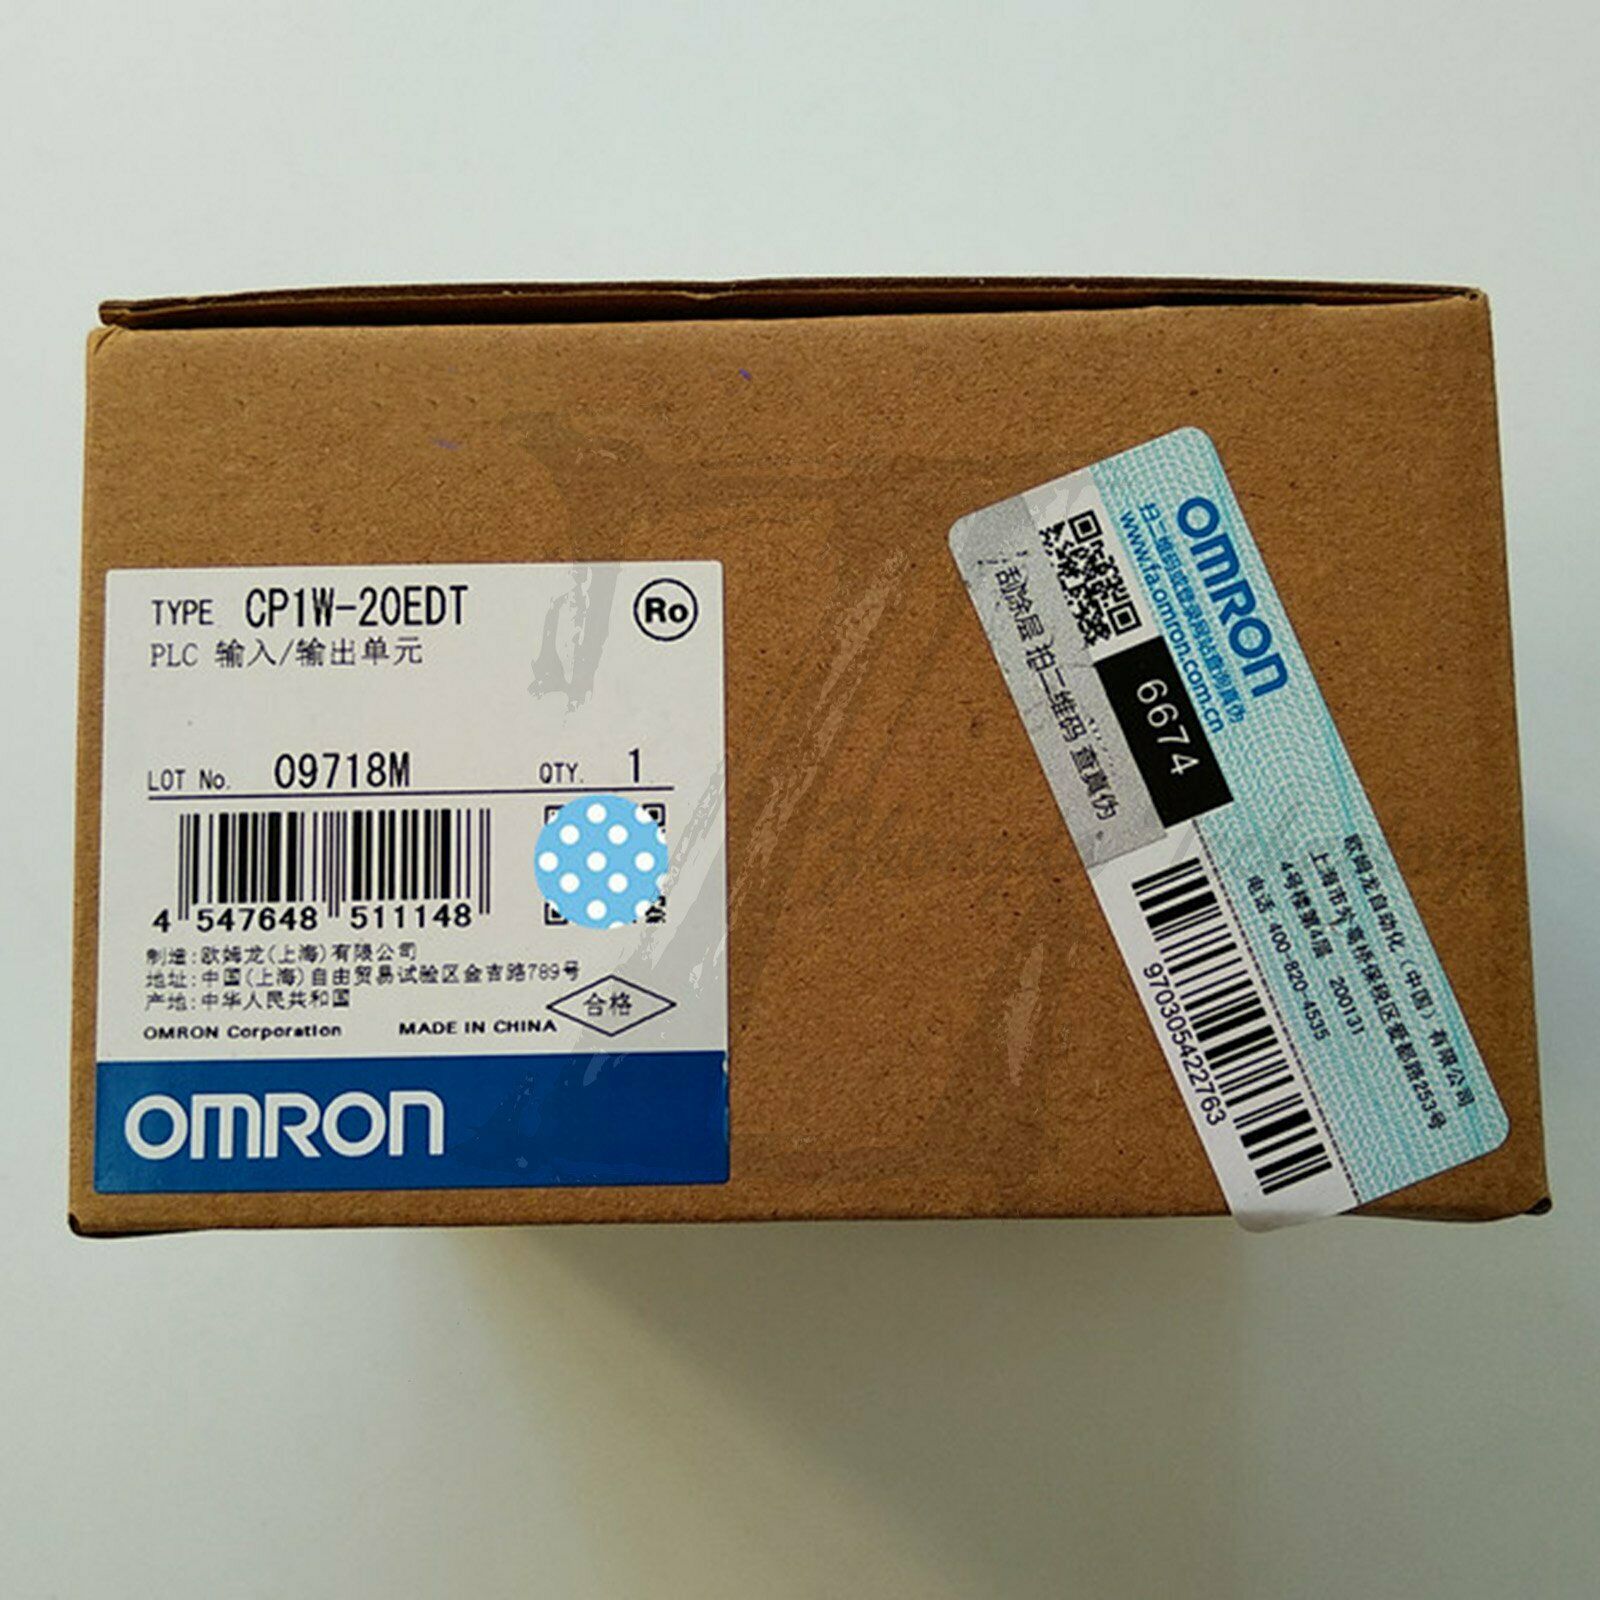 1pc new Omron transistor output module CP1W-20EDT one year warranty KOEED 101-200, 80%, import_2020_10_10_031751, Omron, Other